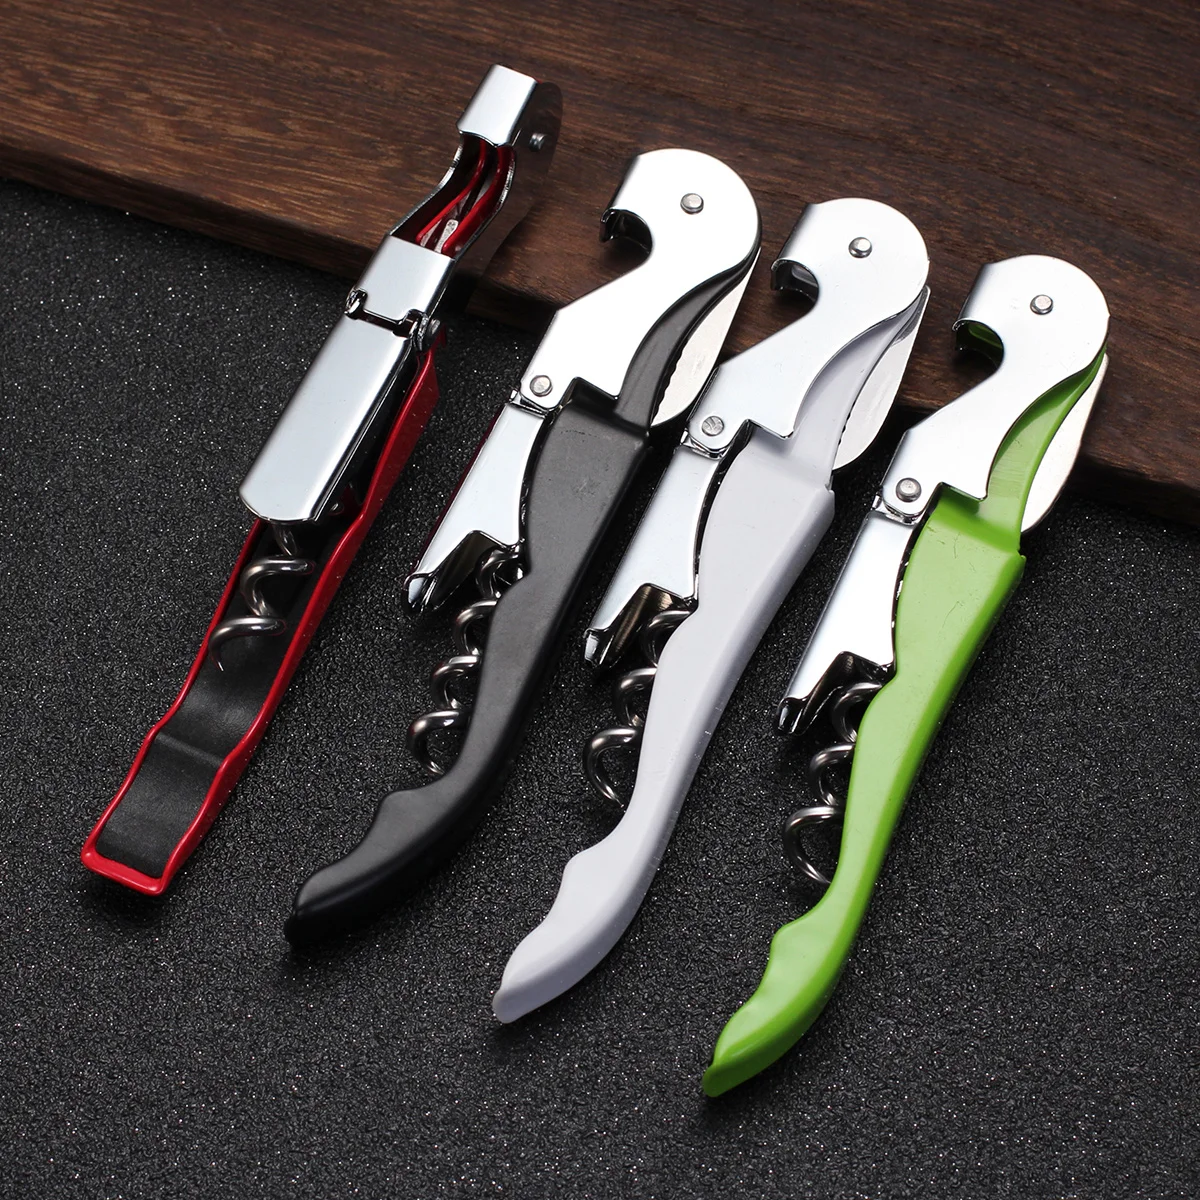 Business Promotion Multifunction Beer Stainless Steel Can Opener Wedding Party Corkscrew Kitchen Accessories